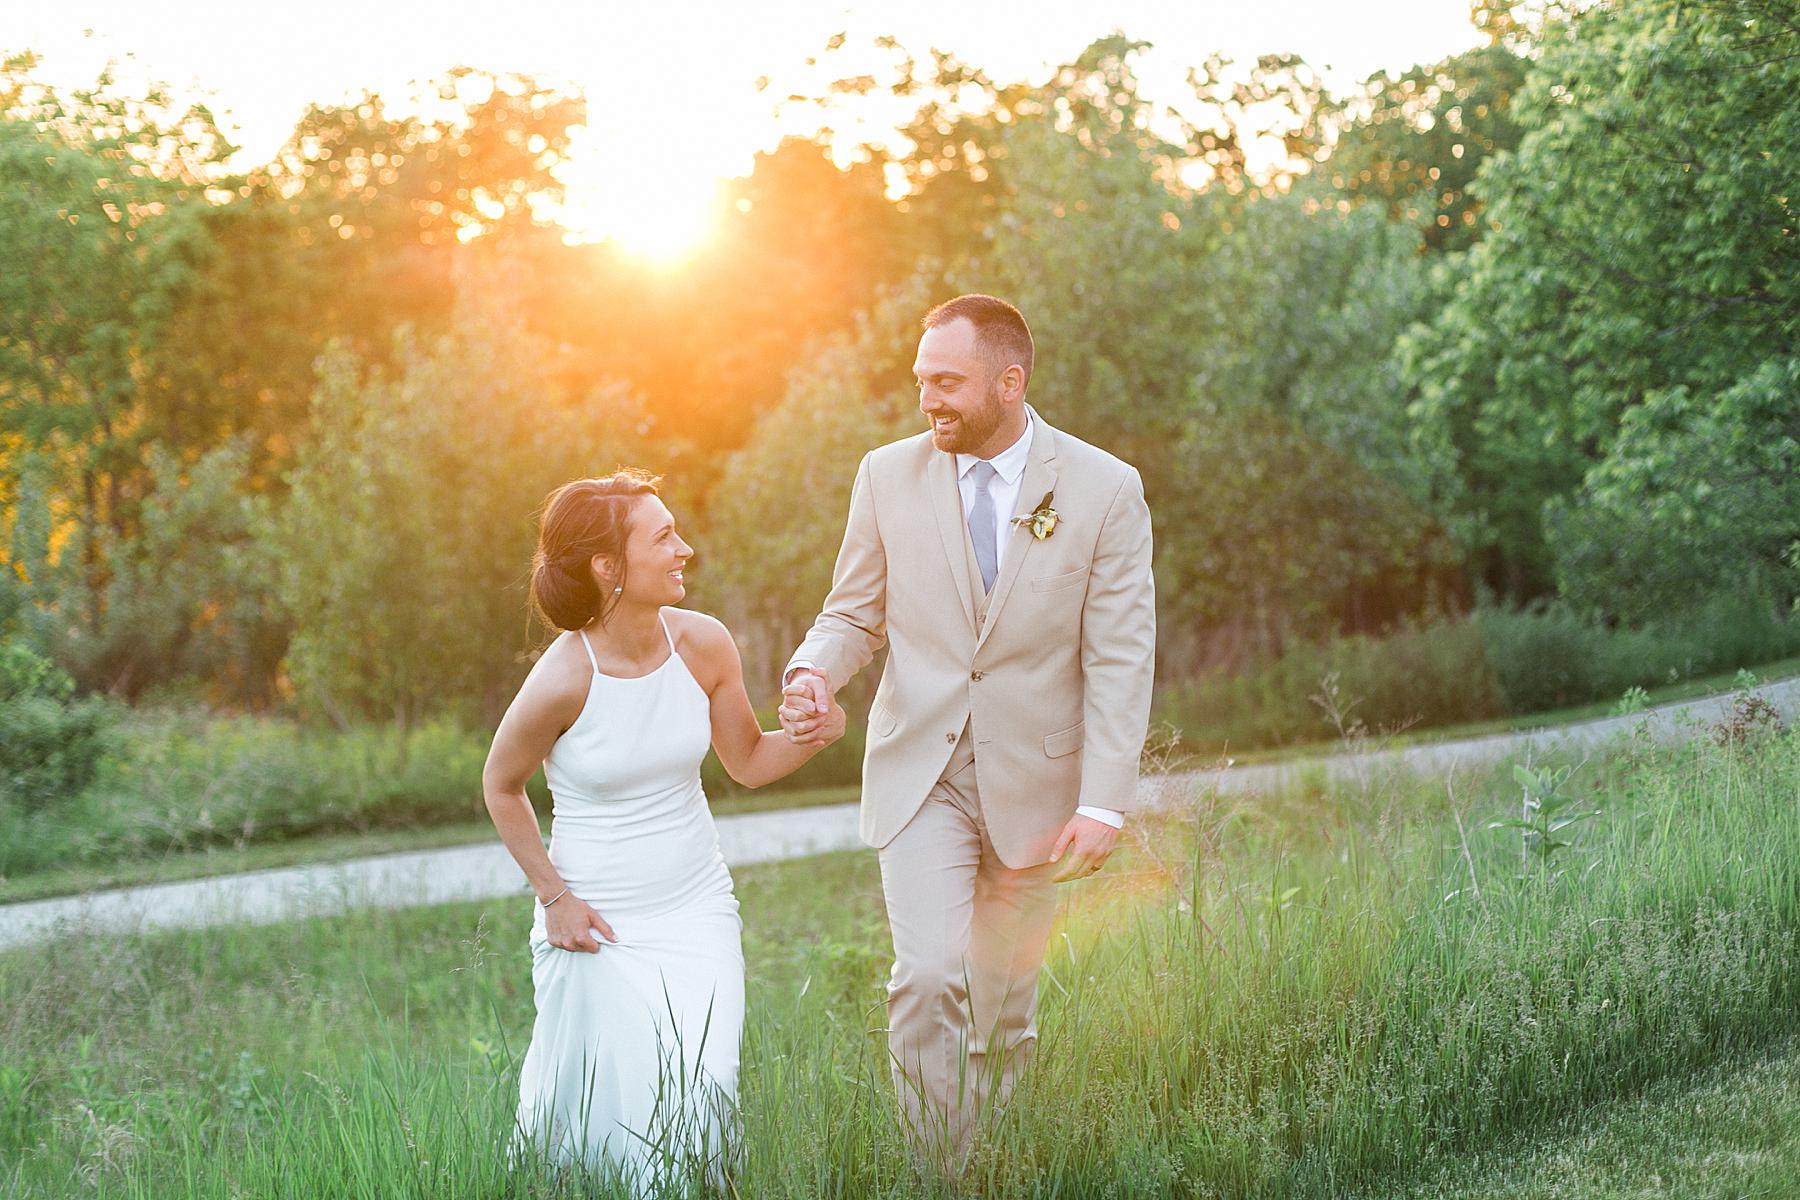 newlywed bride and groom couple portrait photo outdoors near madison, wisconsin